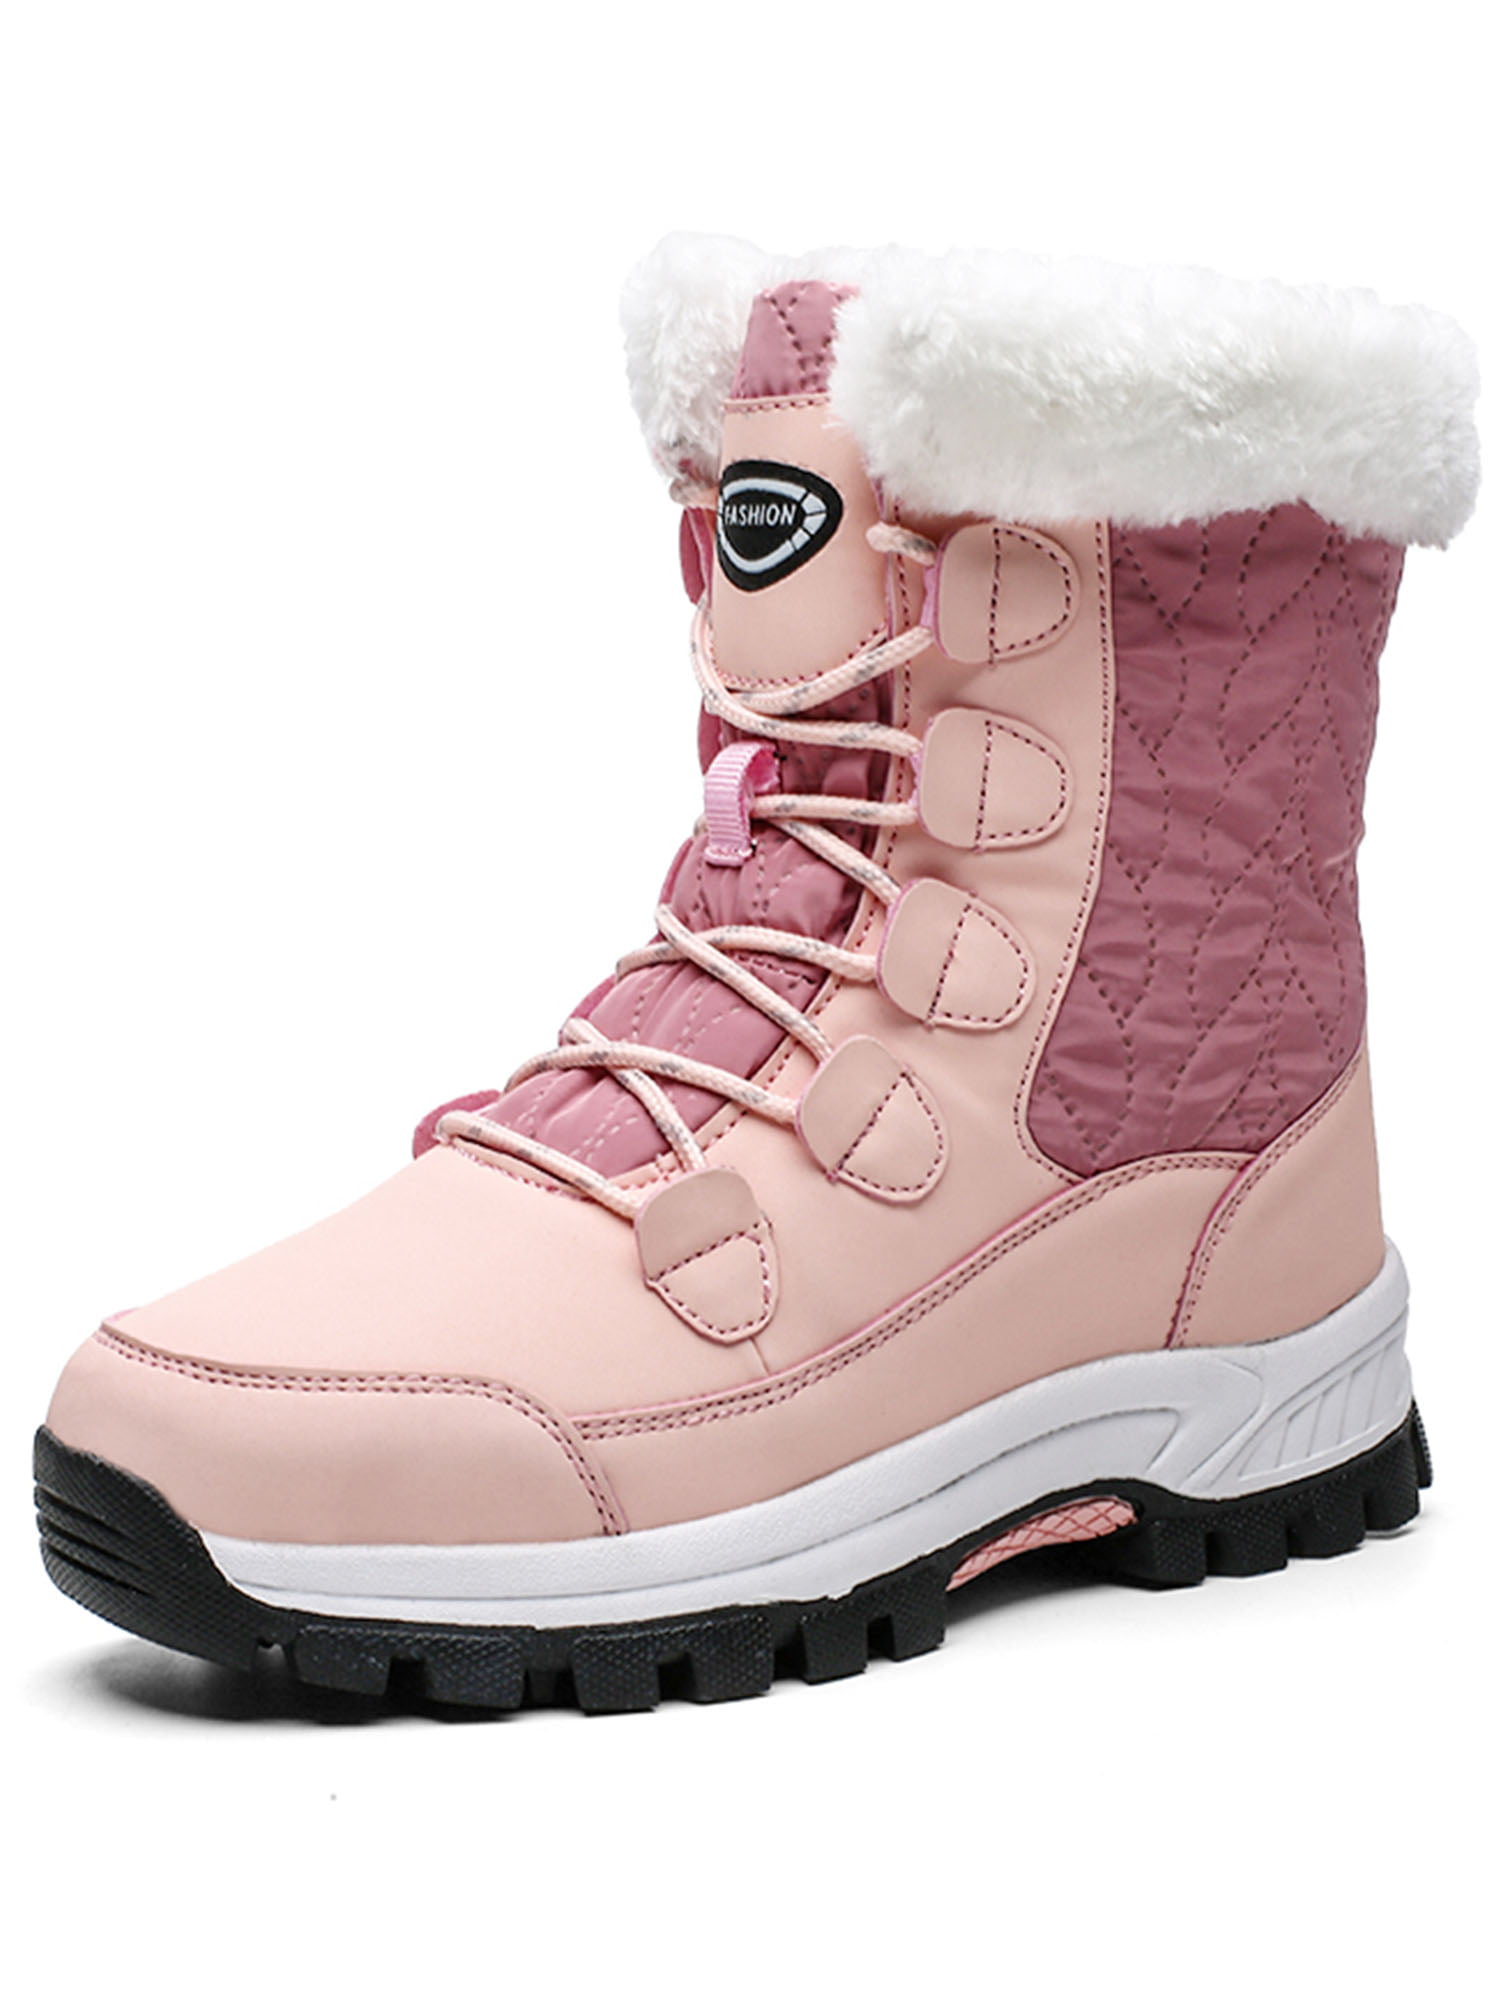 Charmg Winter Boots Warm Snow Boots PU Leather Boots Women Shoes Wedges Non Slip Women Boots